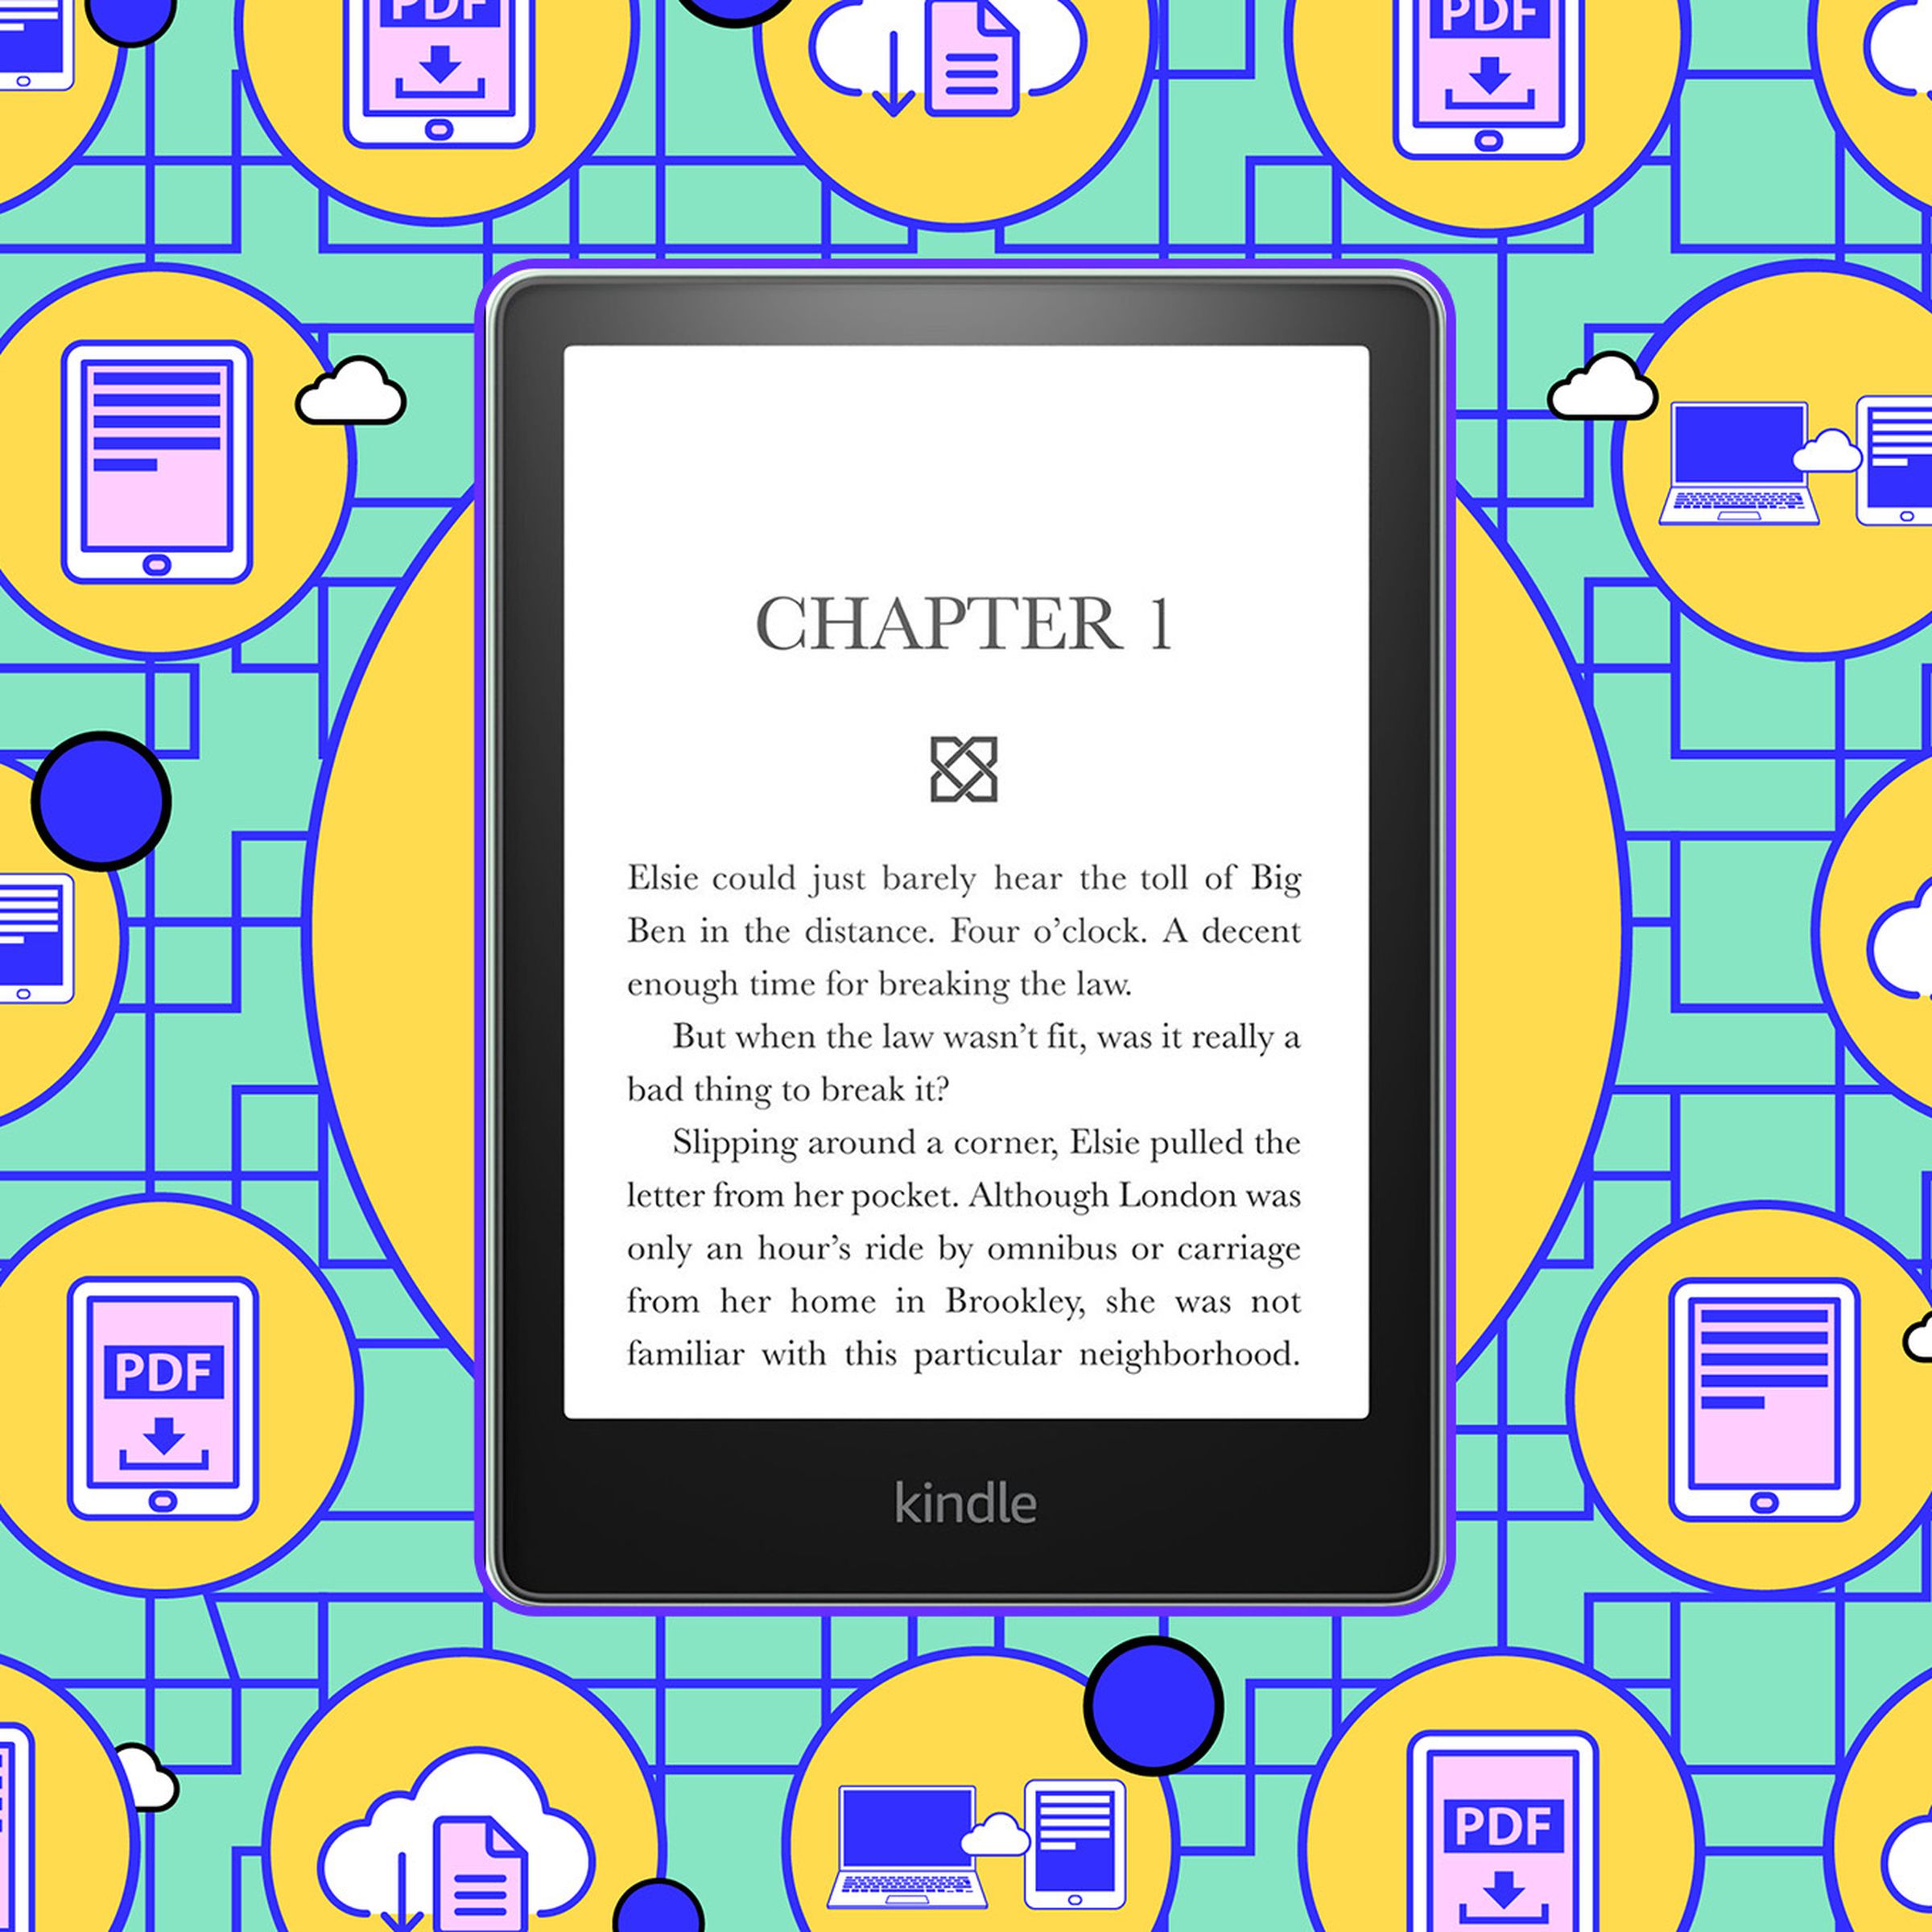 Kindle with illustrated background